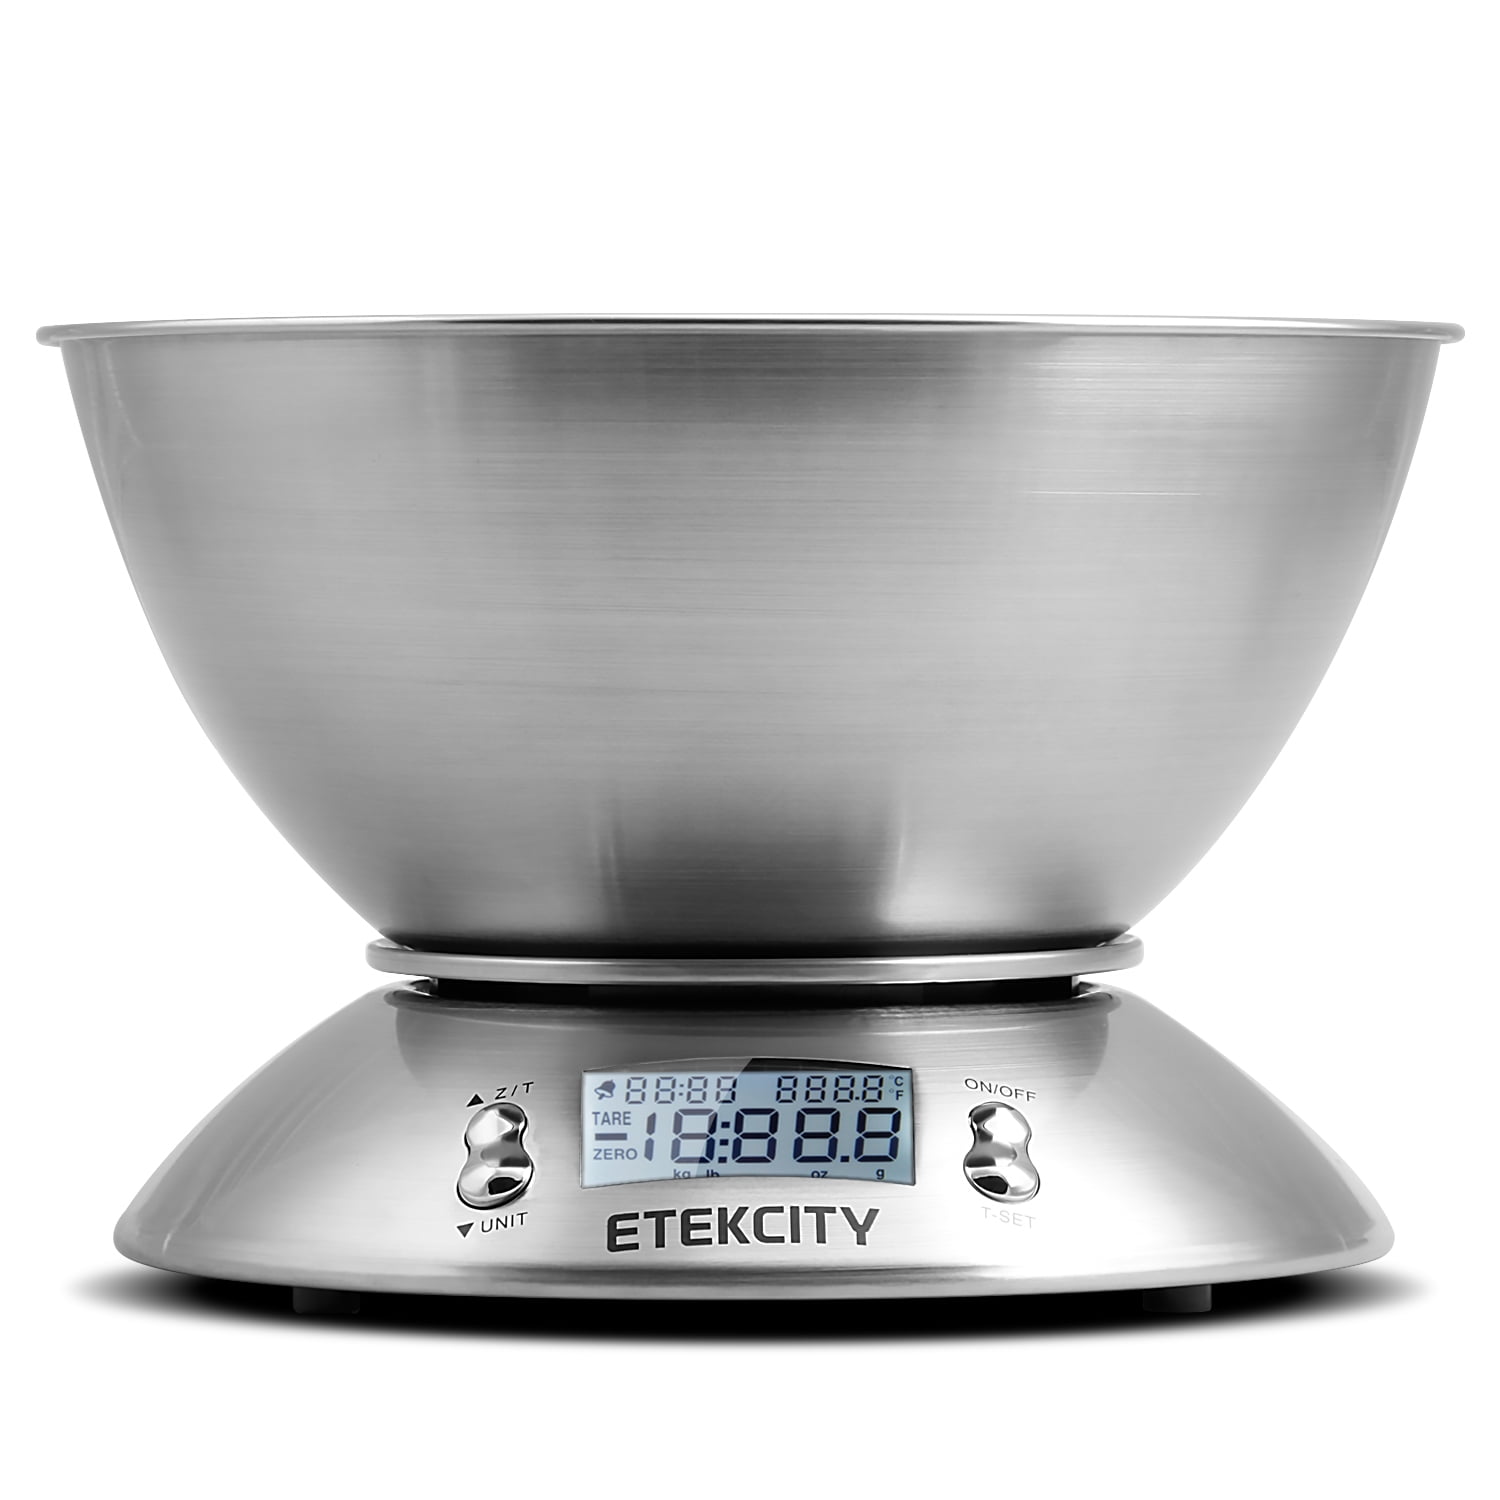 Etekcity Kitchen Scale, Digital Food Scale, with Removable Bowl, Stainless Steel, 11lb/5kg, Silver, EK4150 - image 1 of 12